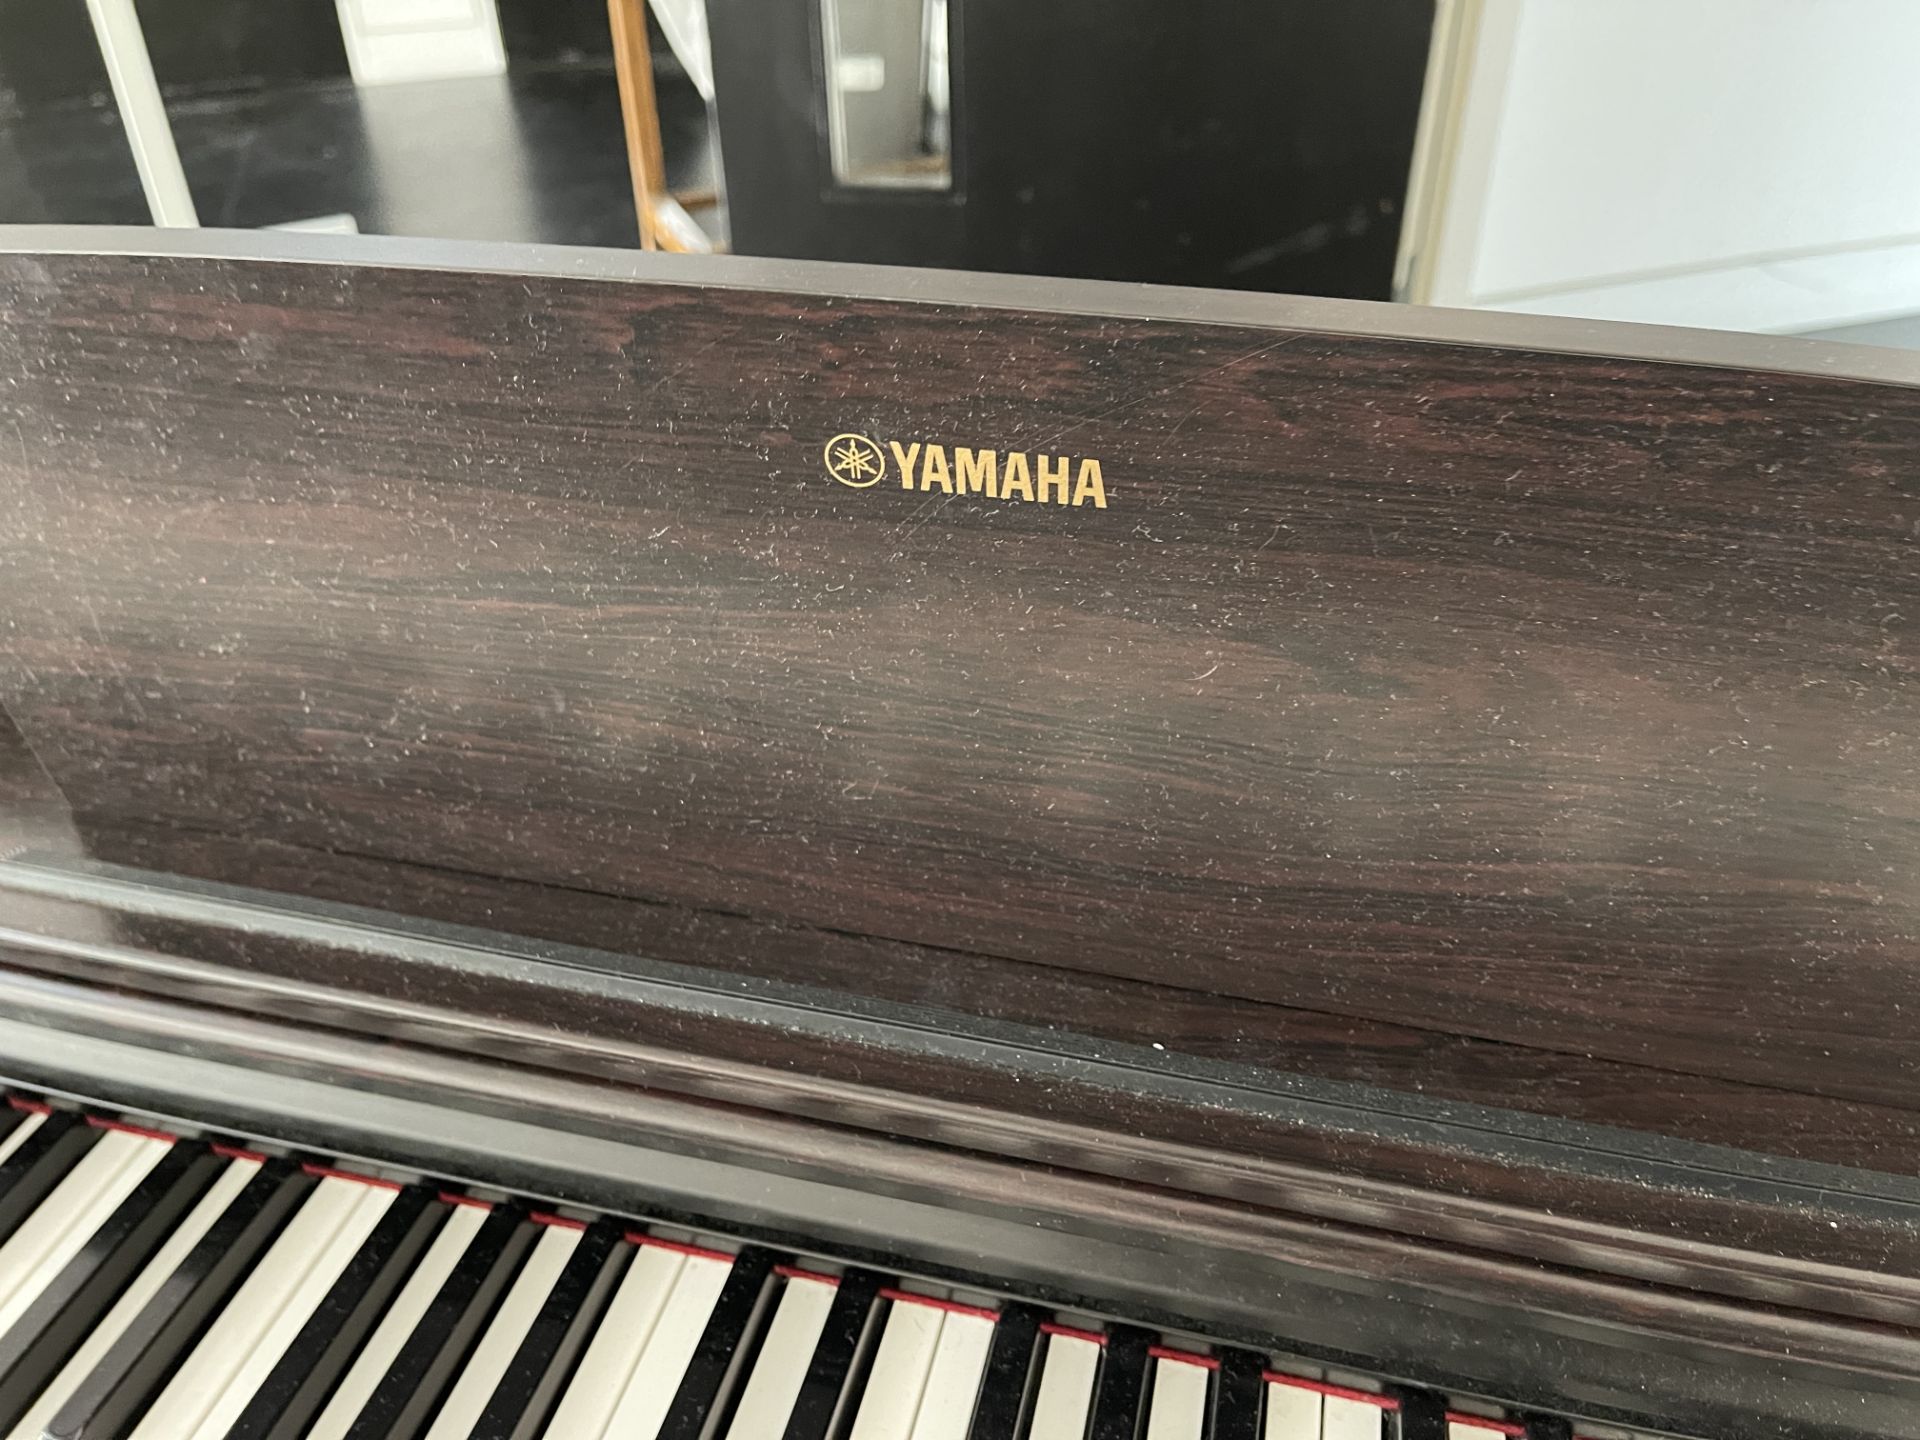 Yamaha Digital Piano Complete with Stool - Image 4 of 10